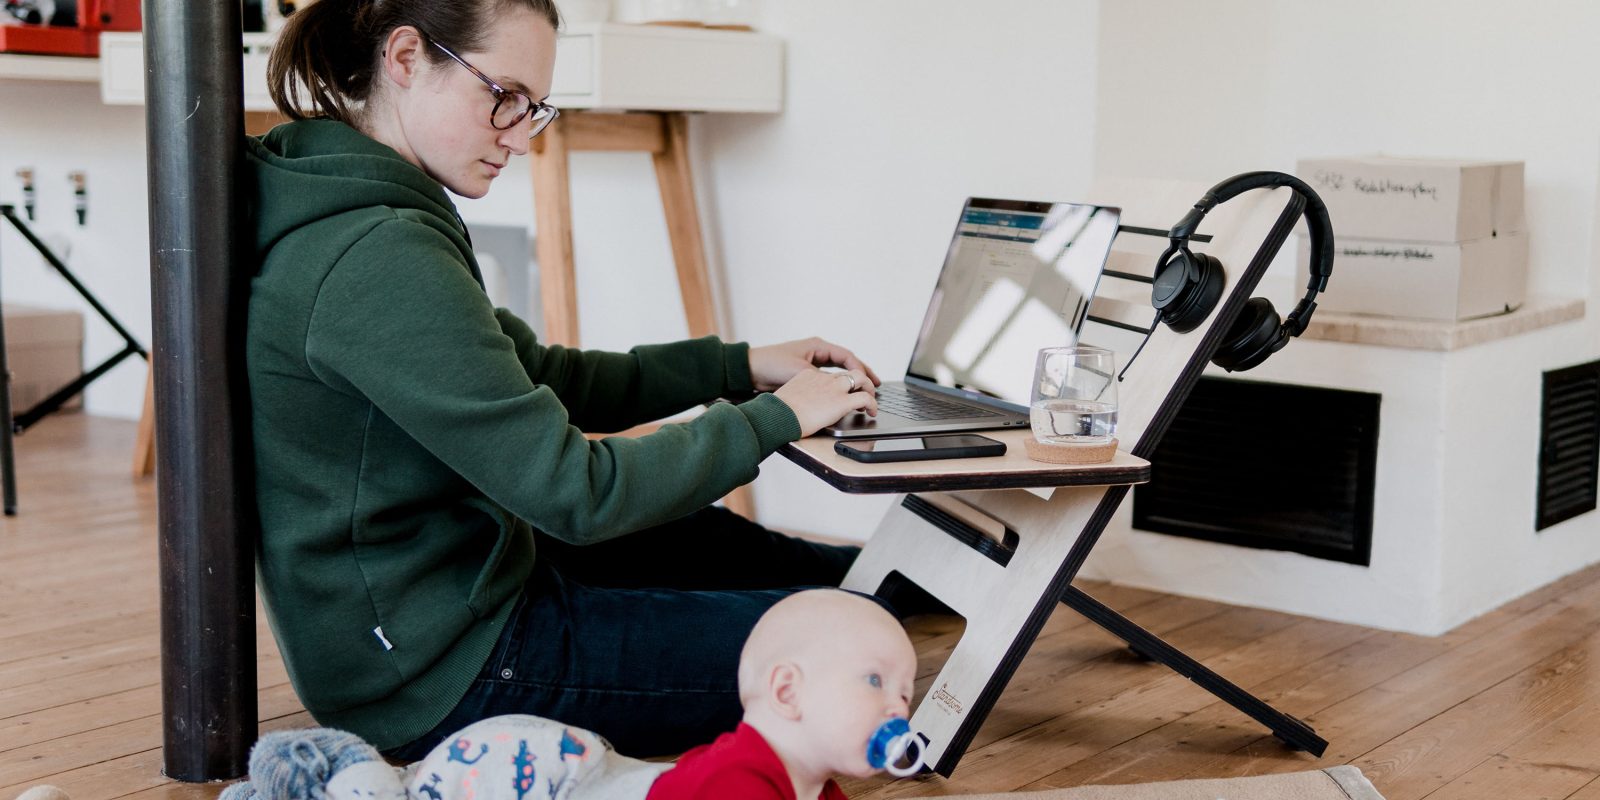 Most workers want flexible remote working